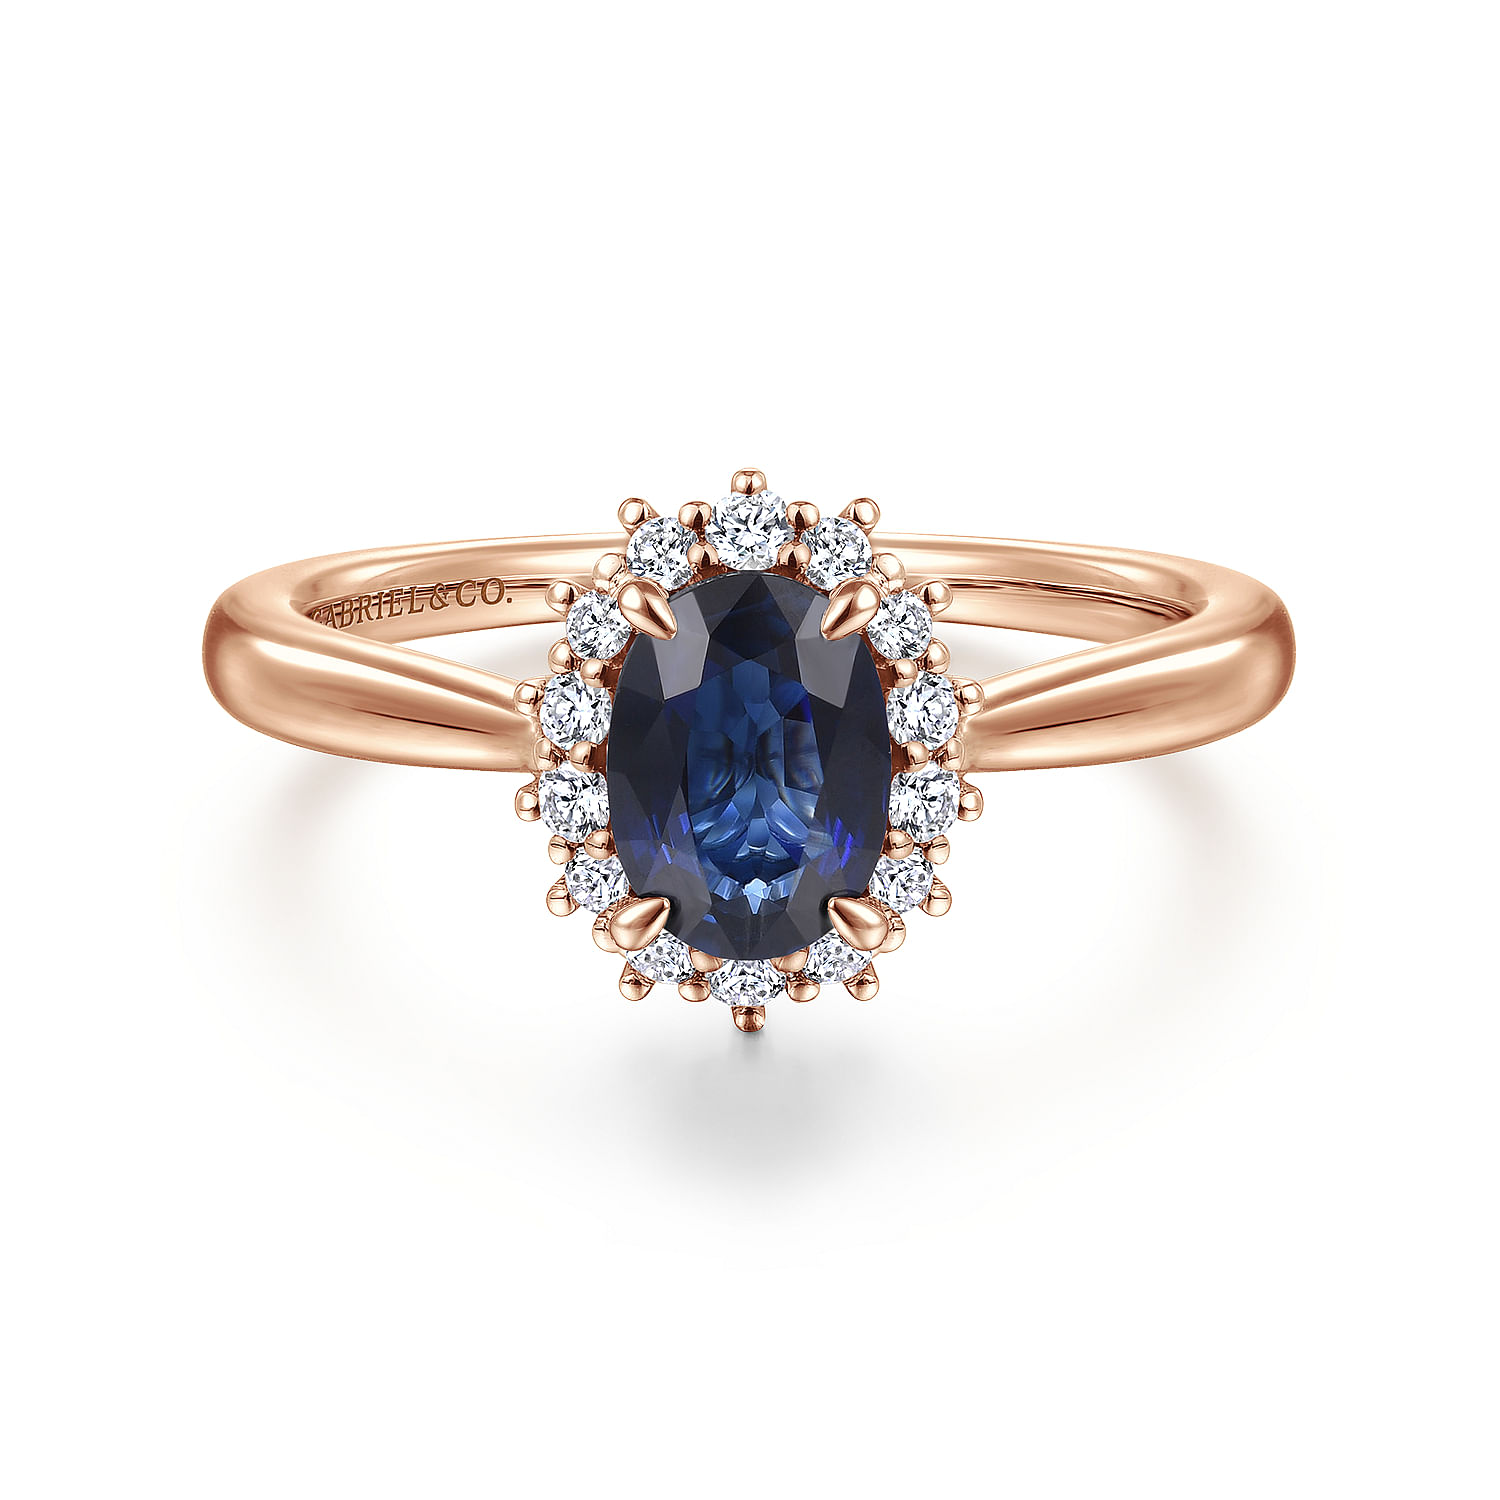 Fergie---14K-Rose-Gold-Oval-Halo-Diamond-and-Sapphire-Engagement-Ring1